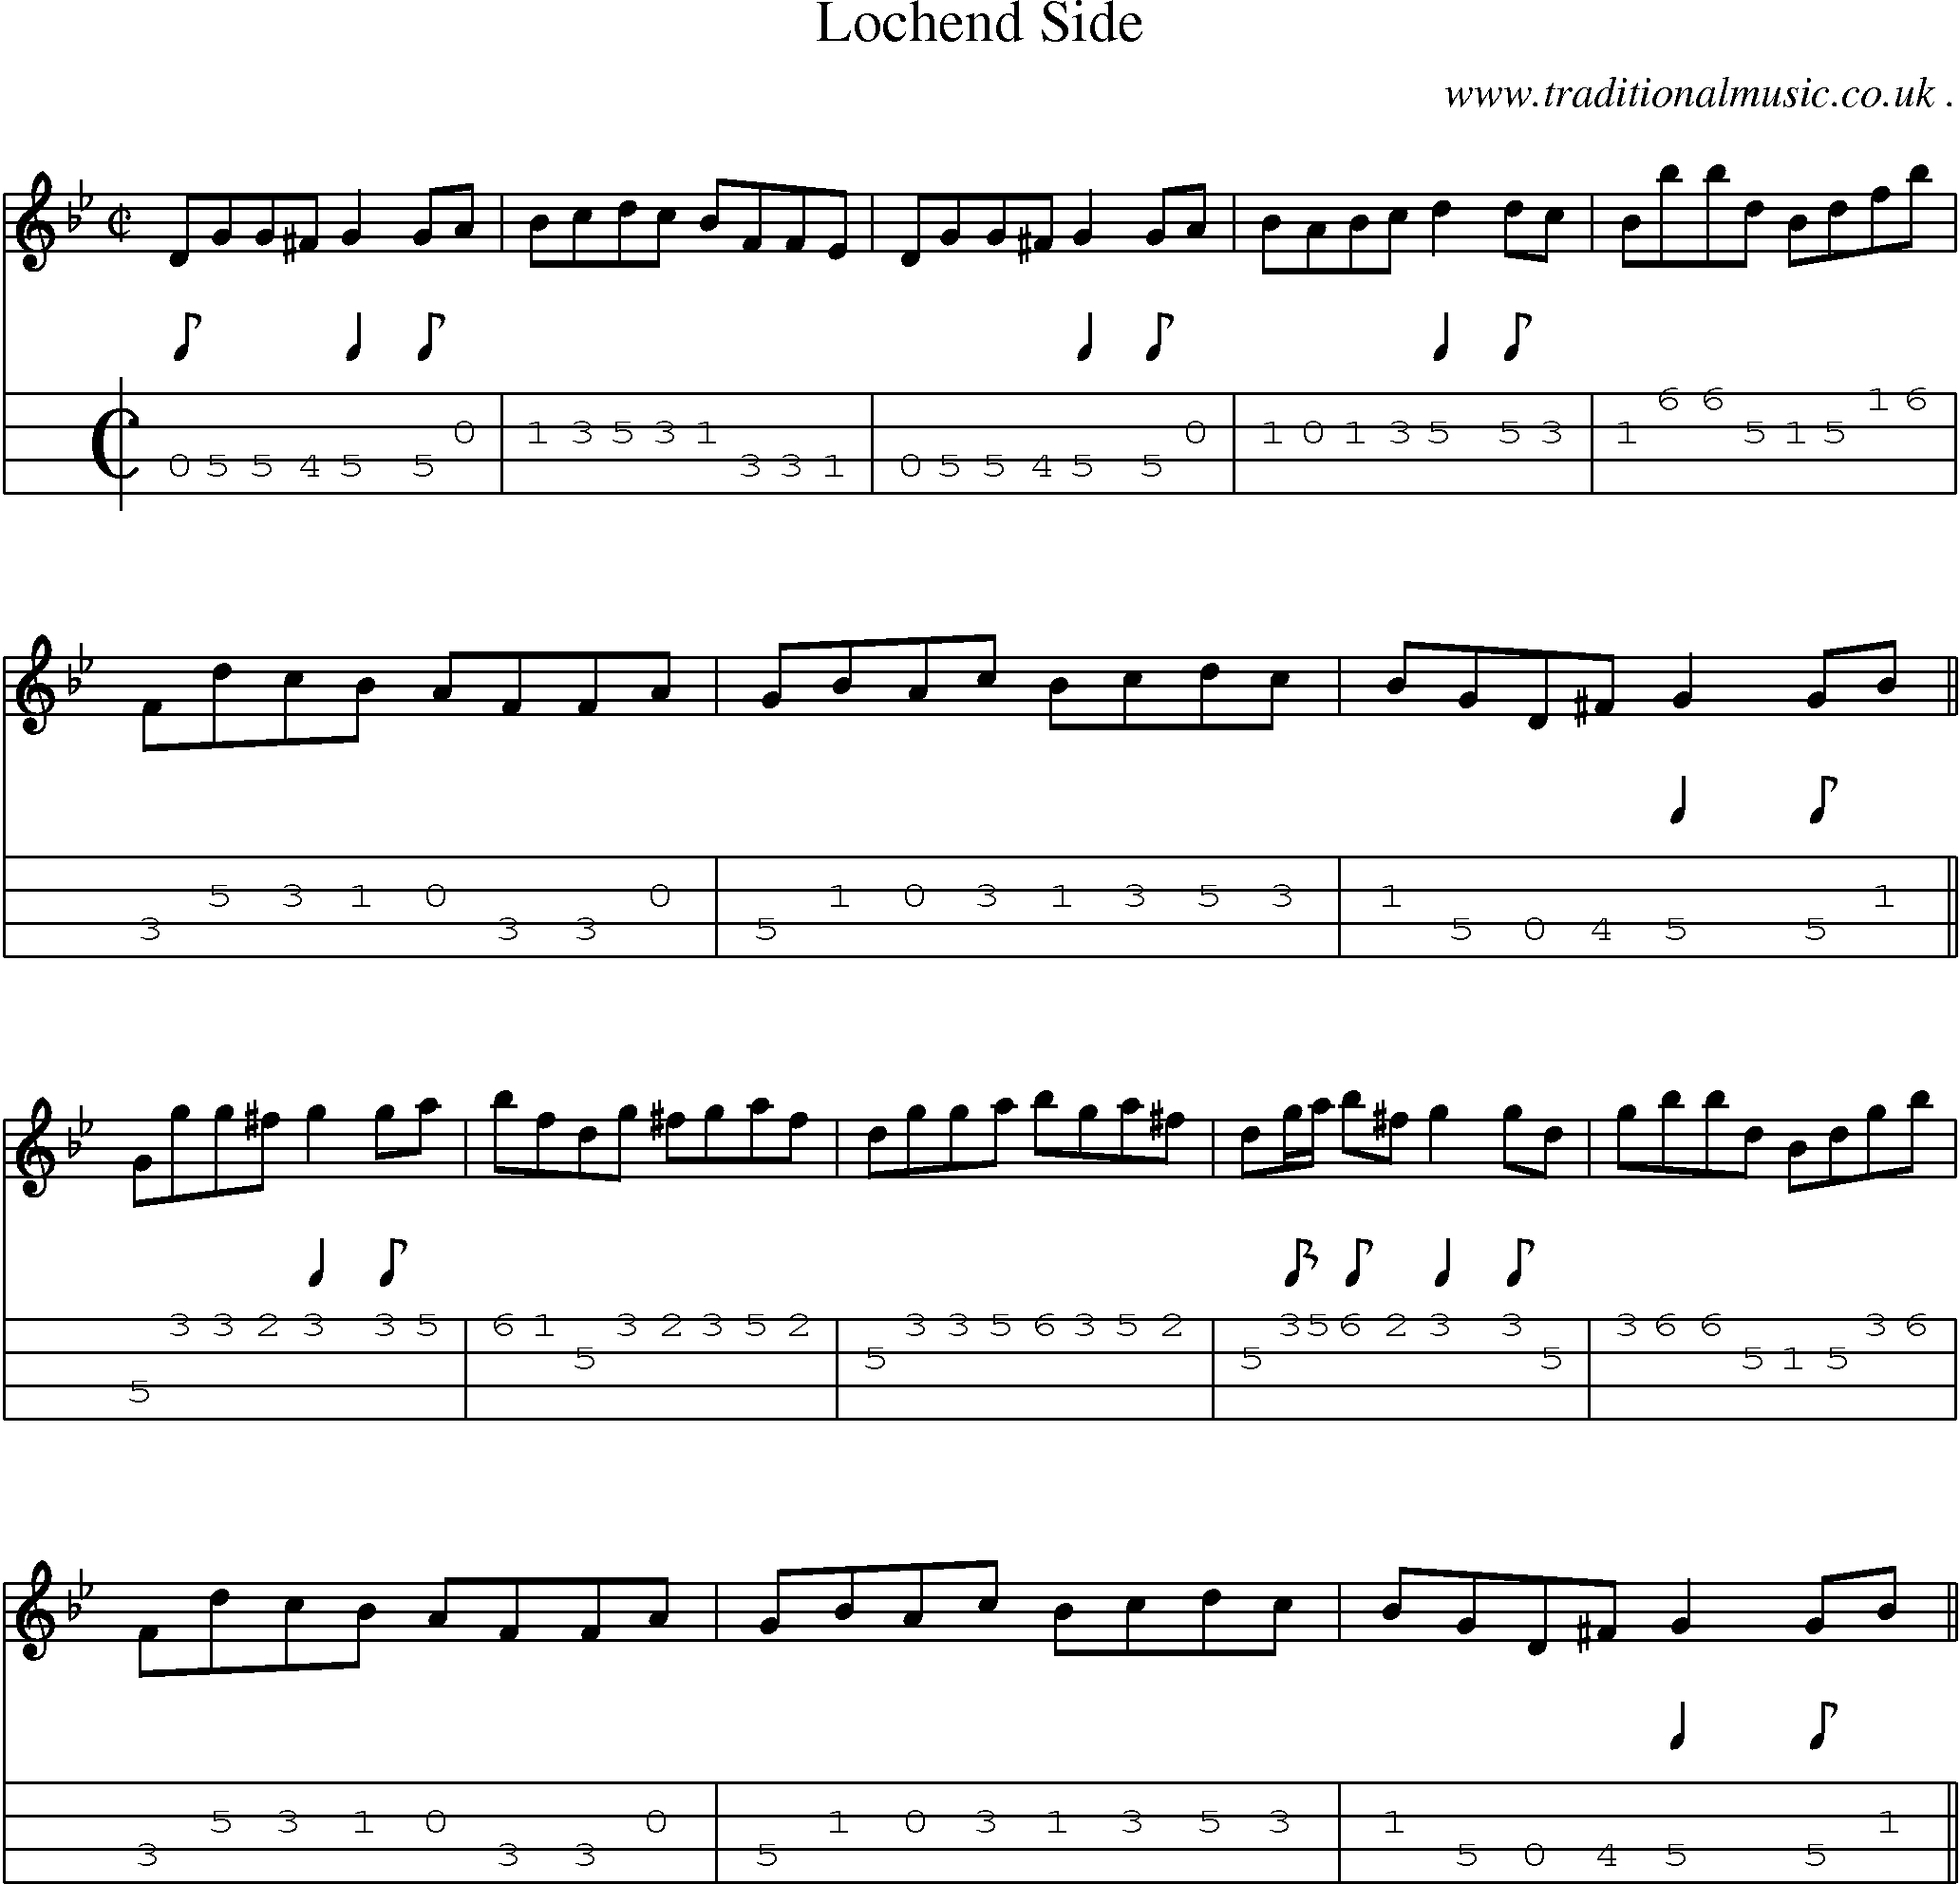 Sheet-music  score, Chords and Mandolin Tabs for Lochend Side